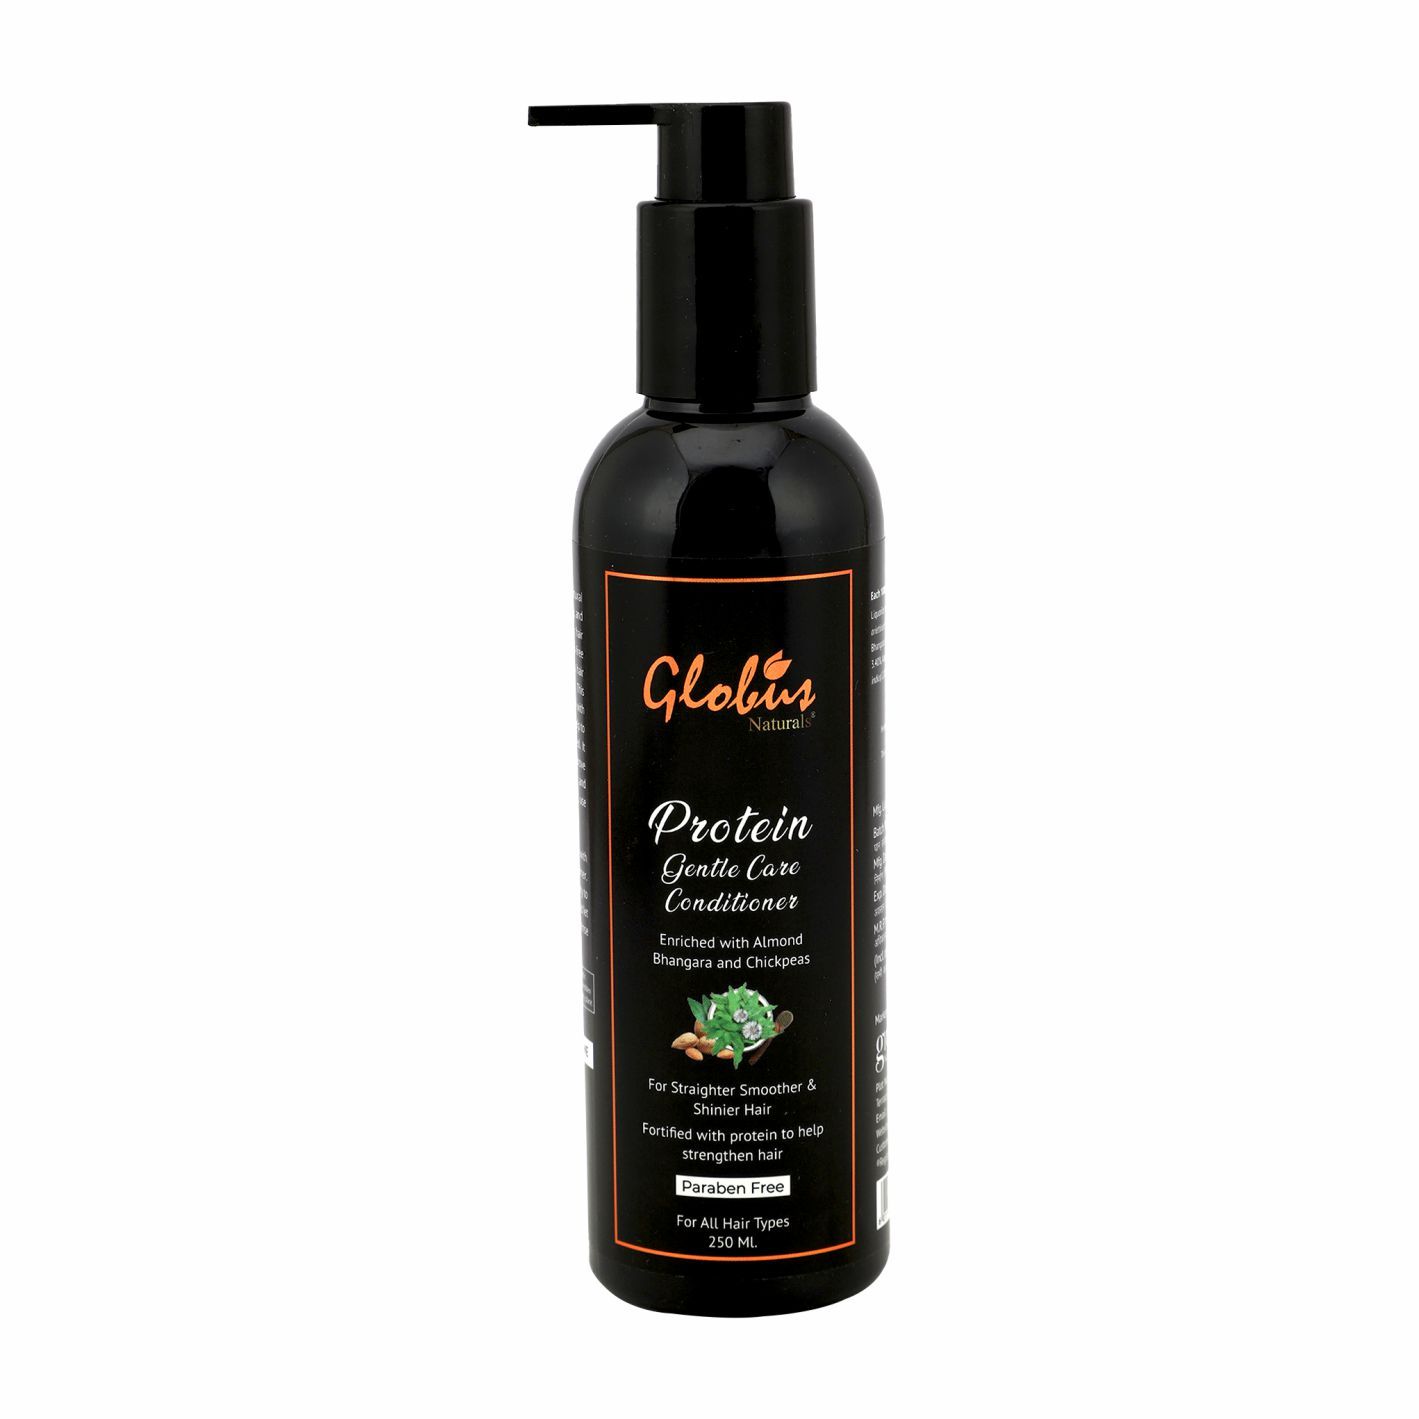 Globus Naturals Protein Gentle Care Hair Growth Conditioner